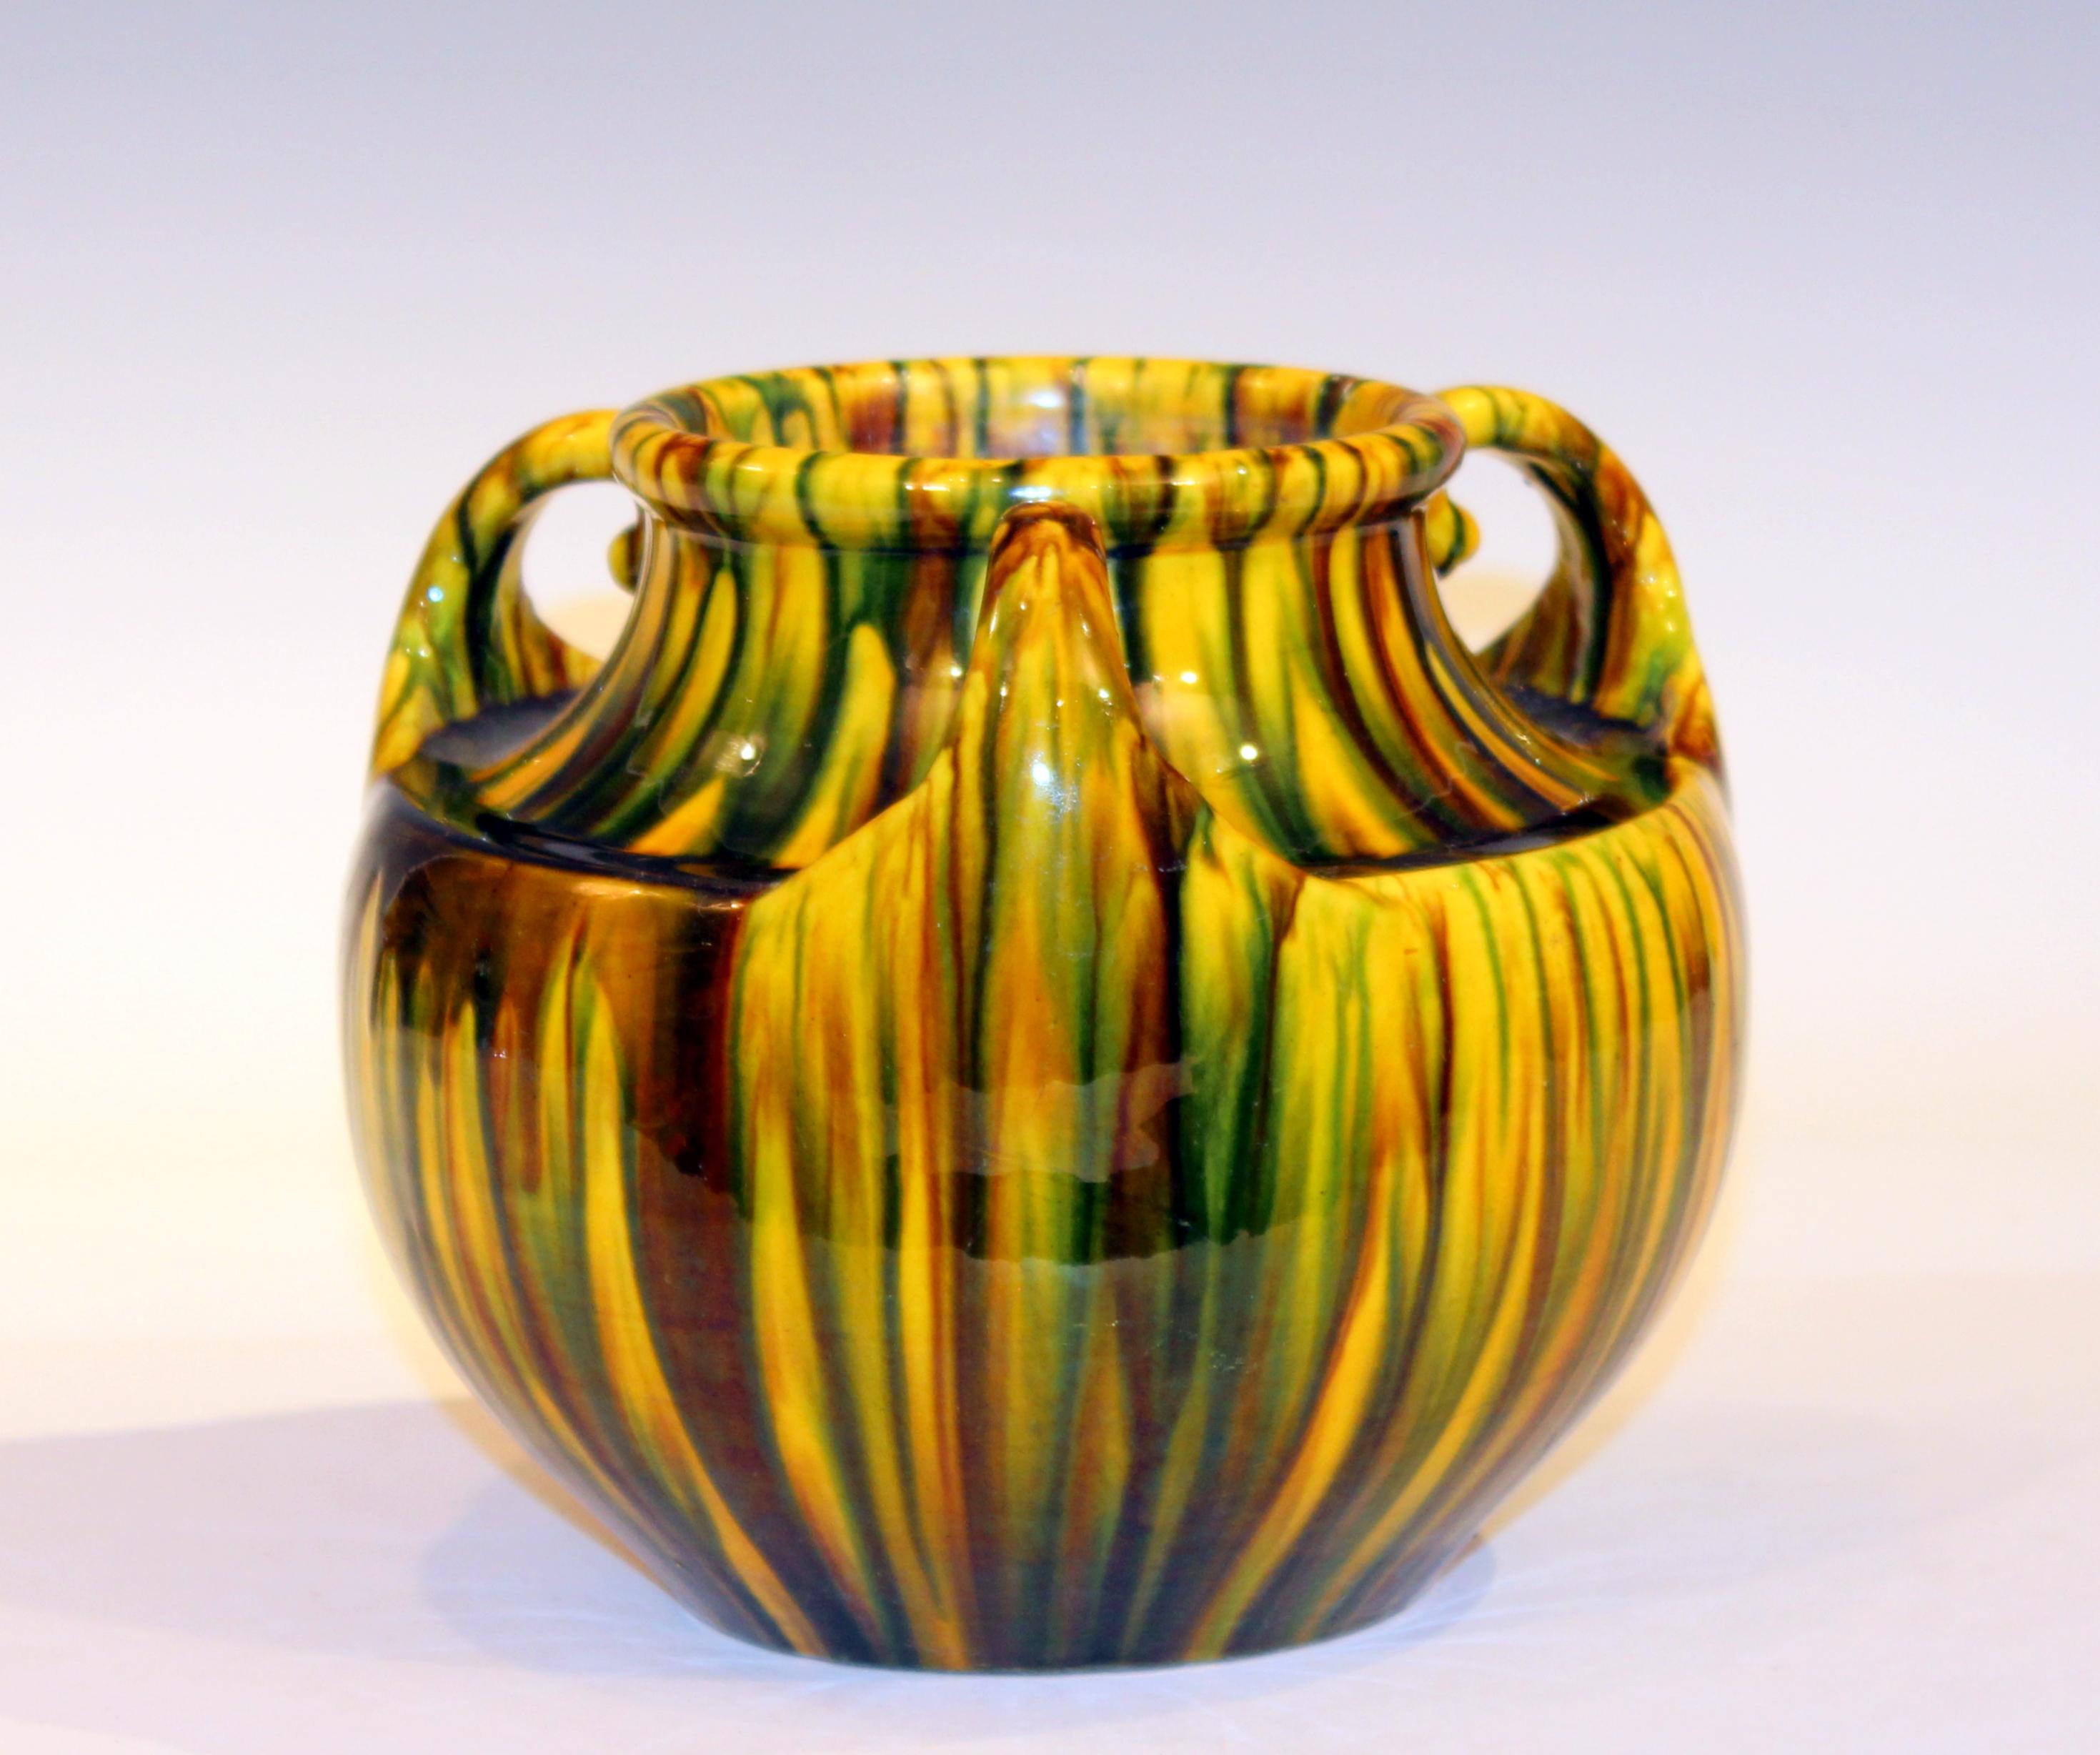 Awaji Pottery vase in Art Deco form with three curled up handles and striking yellow flambé glaze, circa 1930. Impressed marks. 6